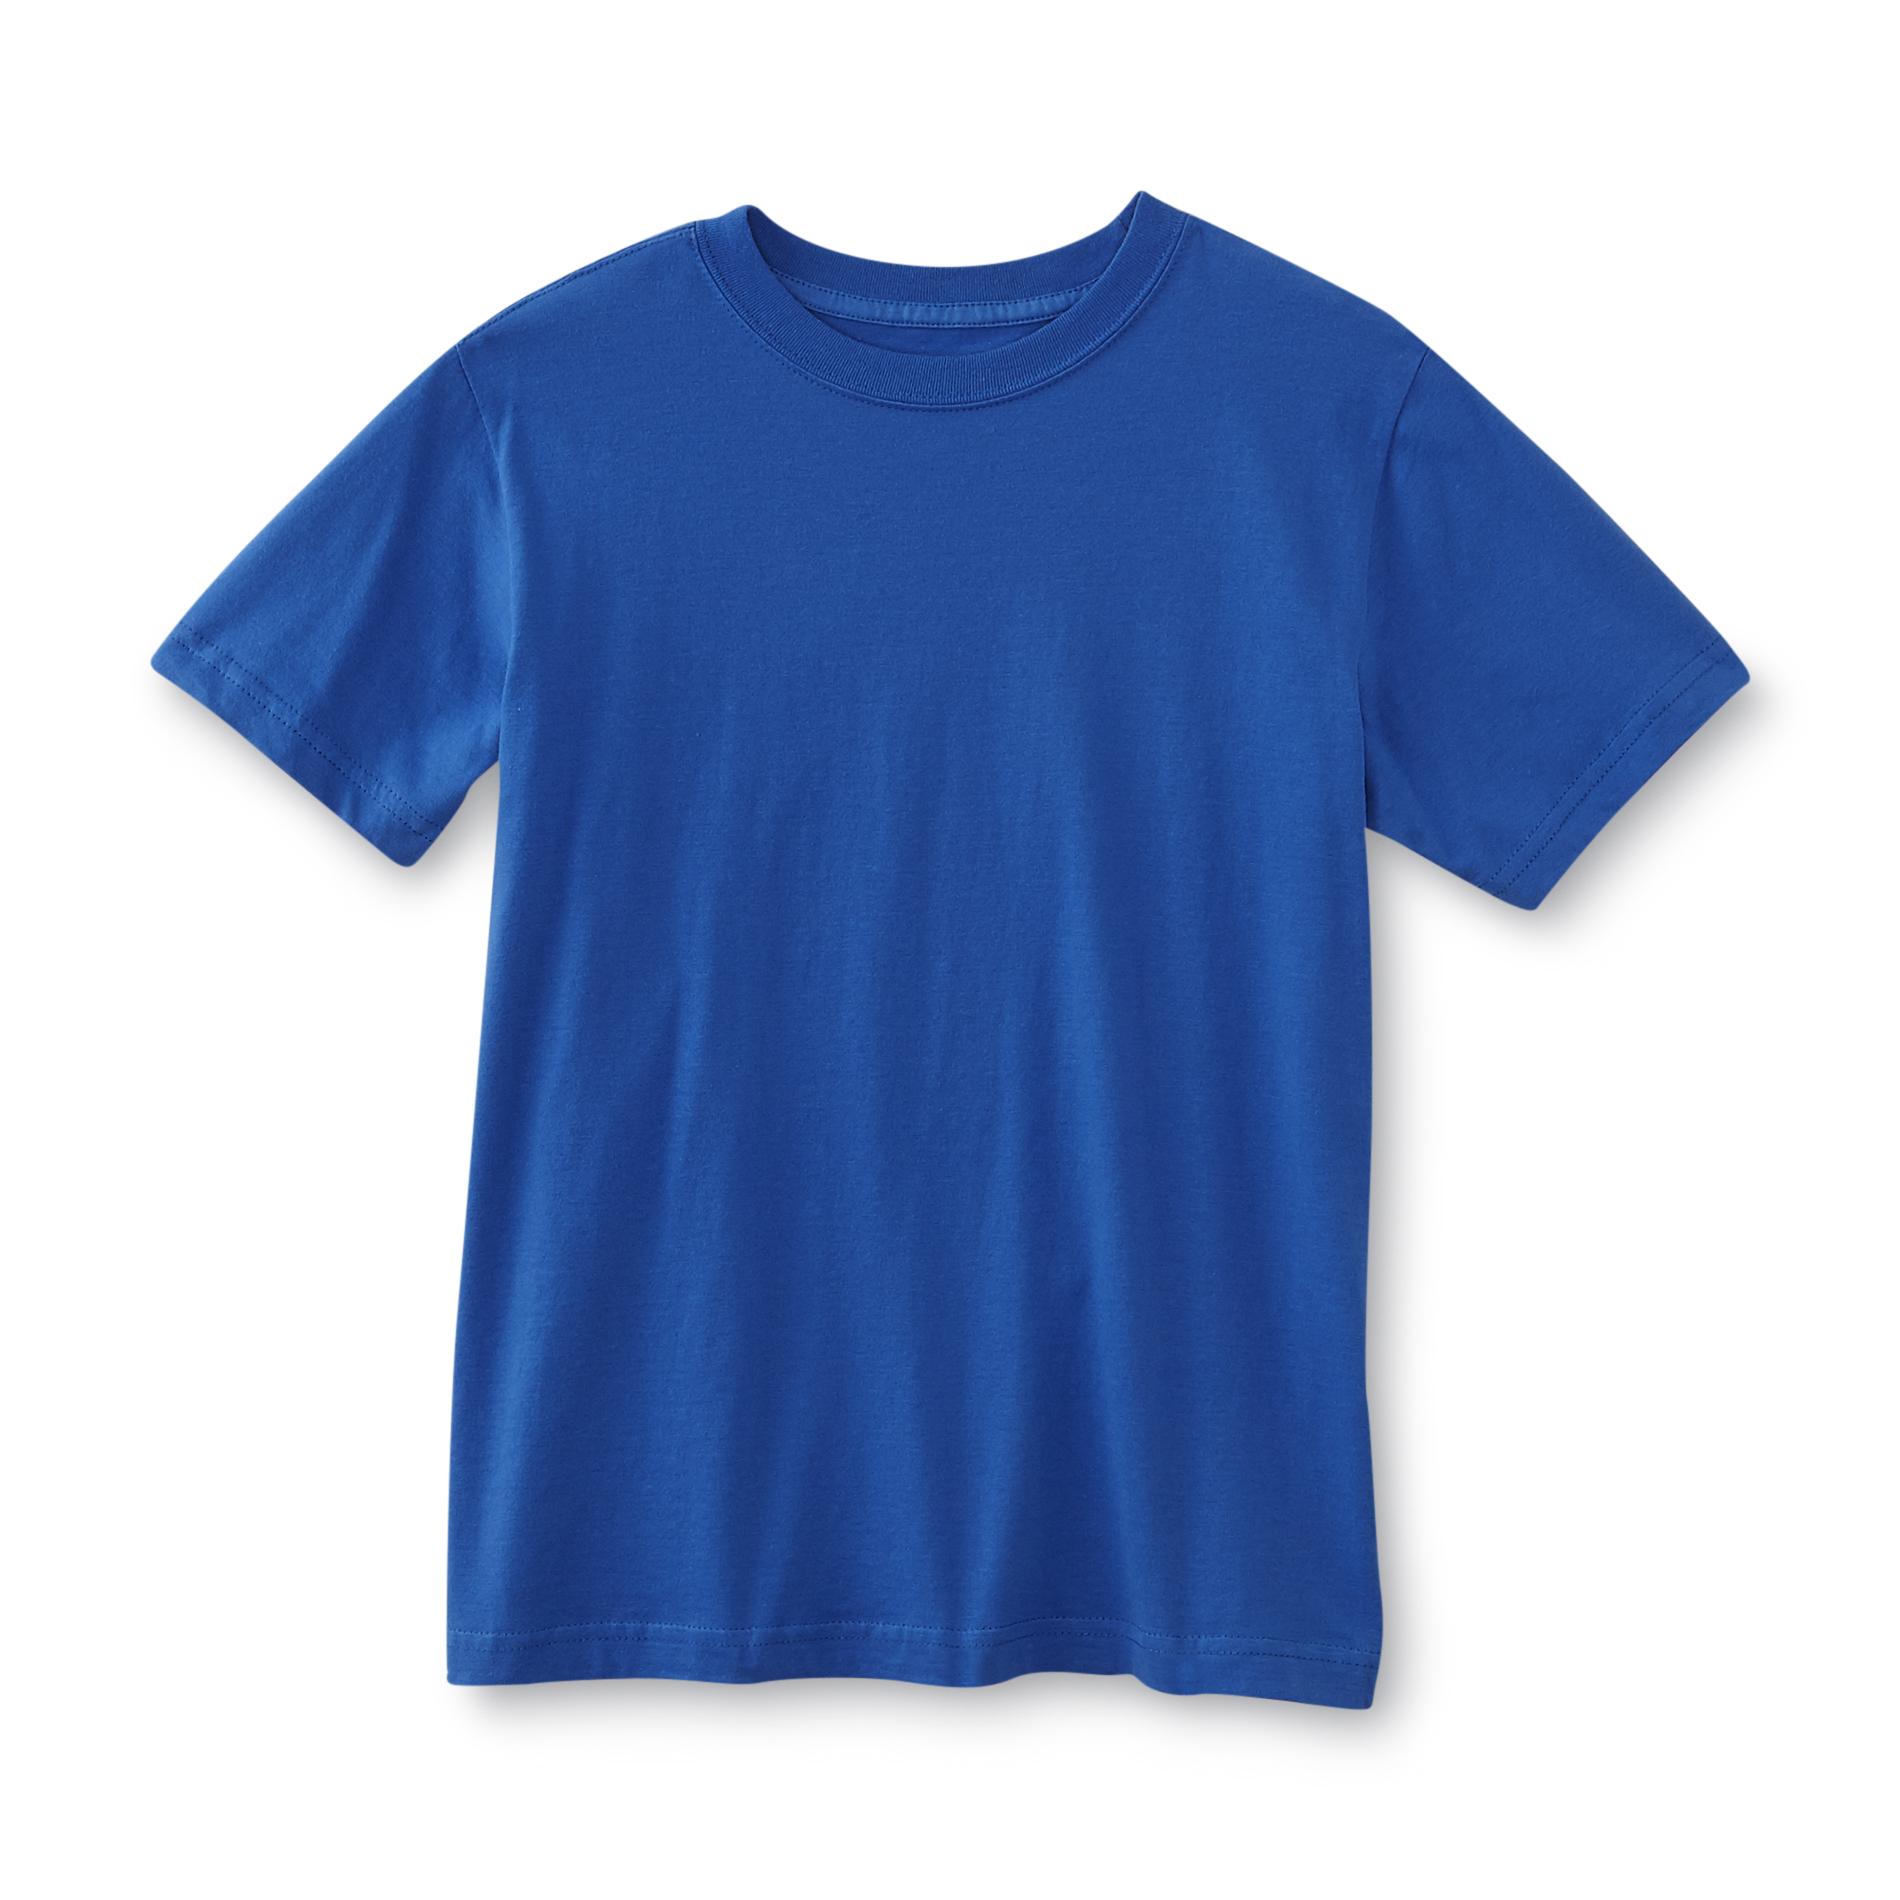 Simply Styled Boy's T-Shirt